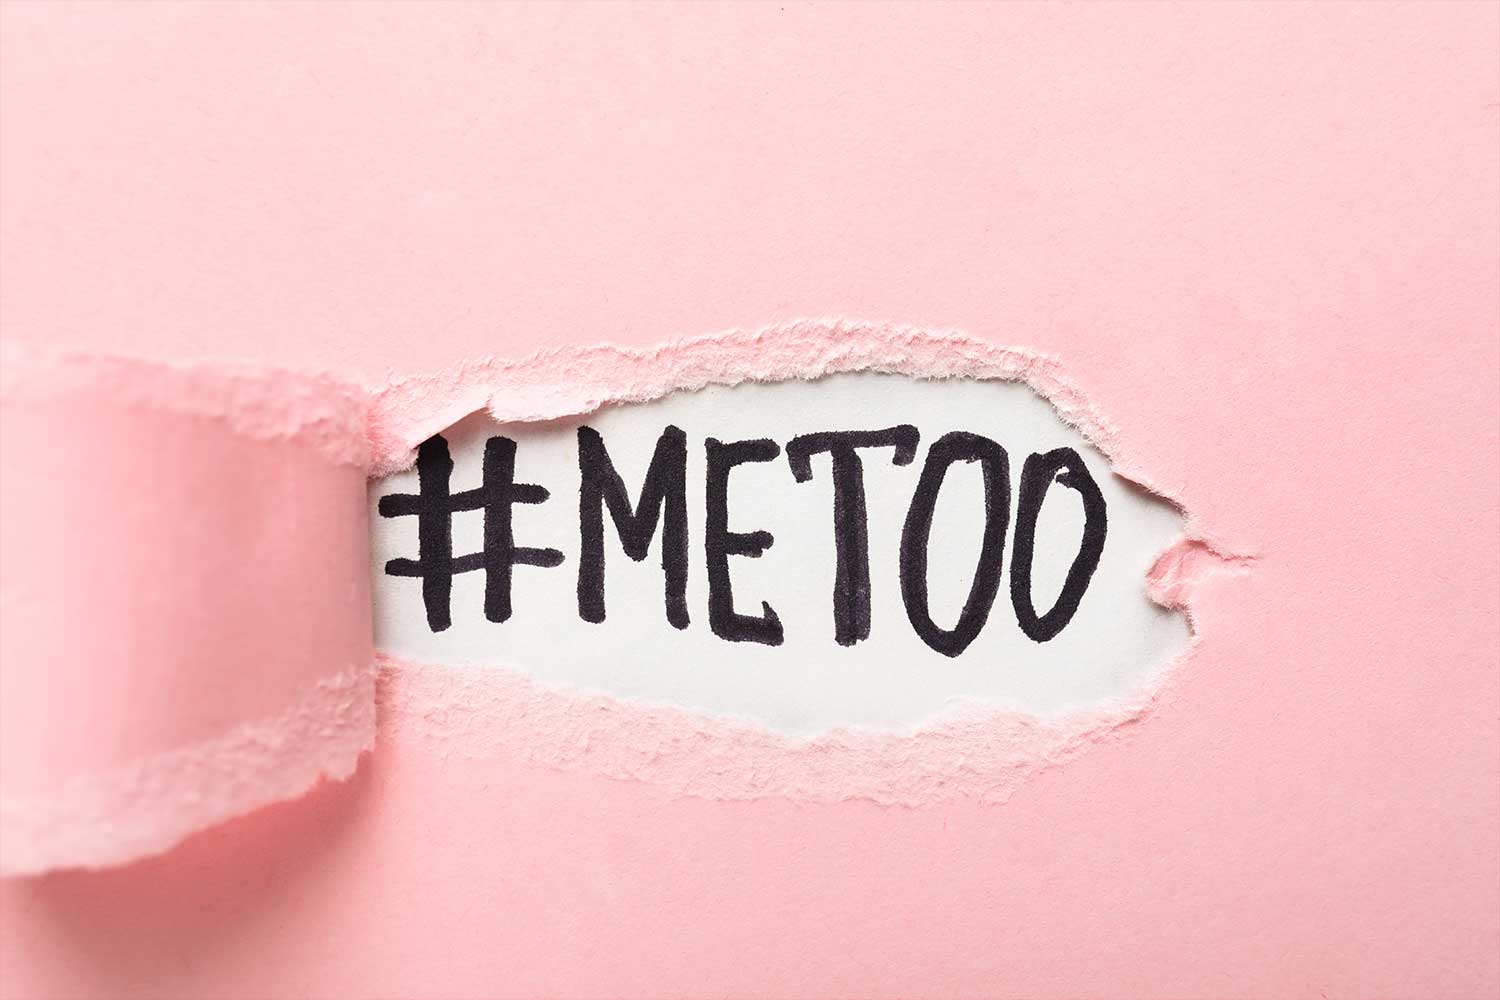 pink paper ripped to show "#METOO" underneath